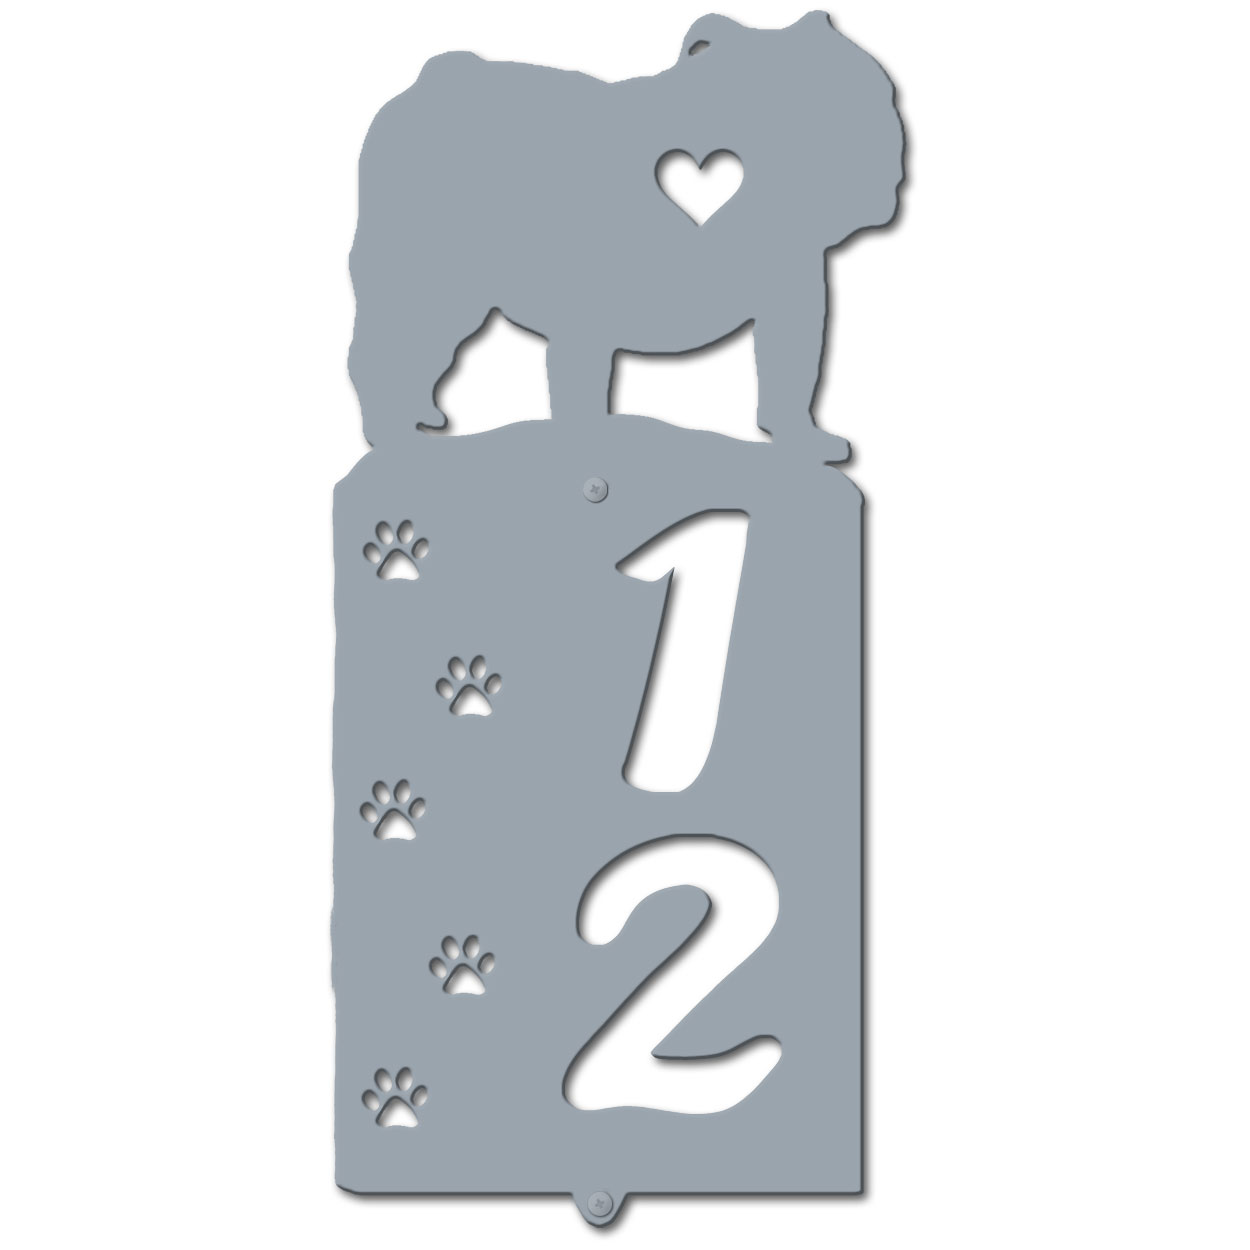 636202 - English Bulldog Cut-Outs Two Digit Address Number Plaque - Choose Size and Color